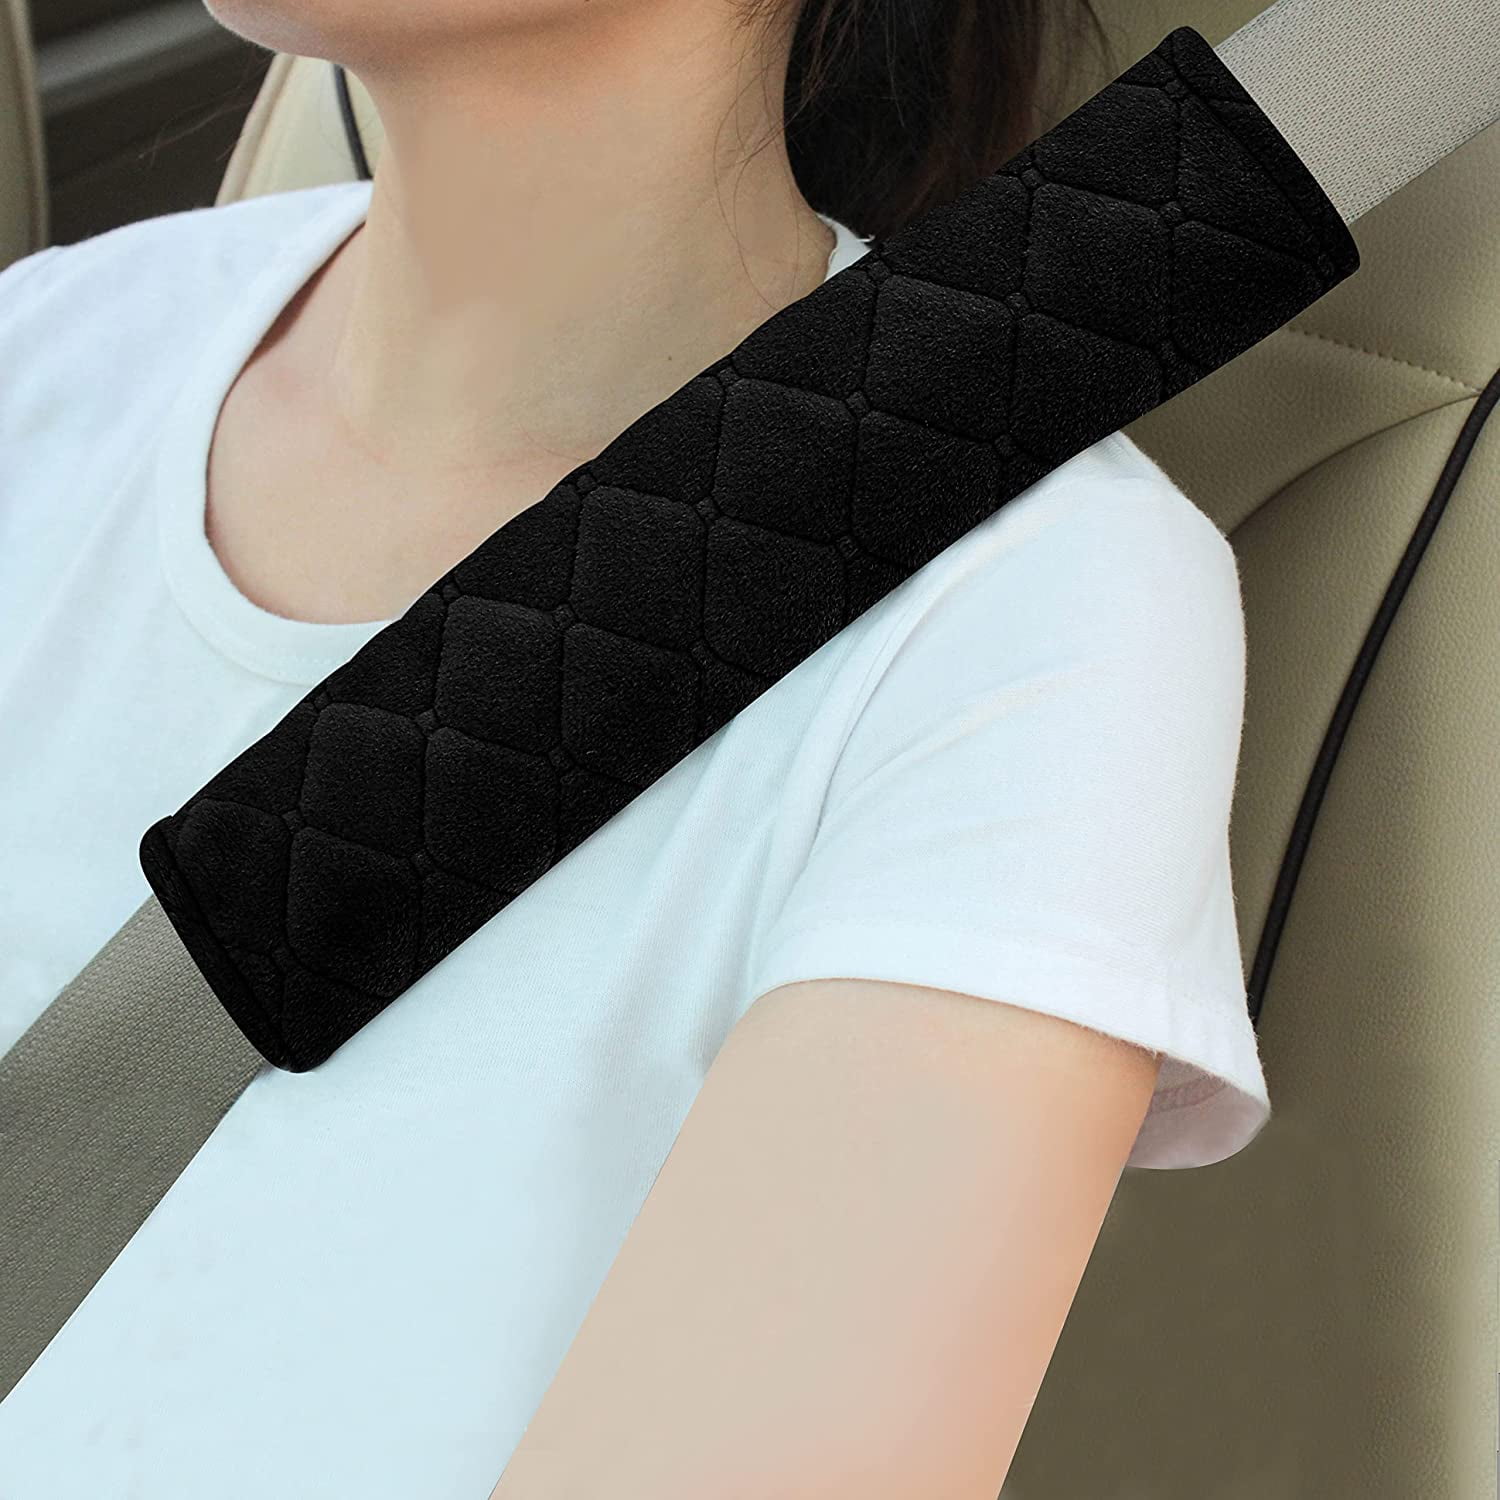 Casewin 1 Pair Car Seat Belt Pads Seatbelt Protector Soft Comfort Seat Belt  Shoulder Strap Covers Harness Pads Helps Protect Your Neck and Shoulder Protection  Pad Cover 